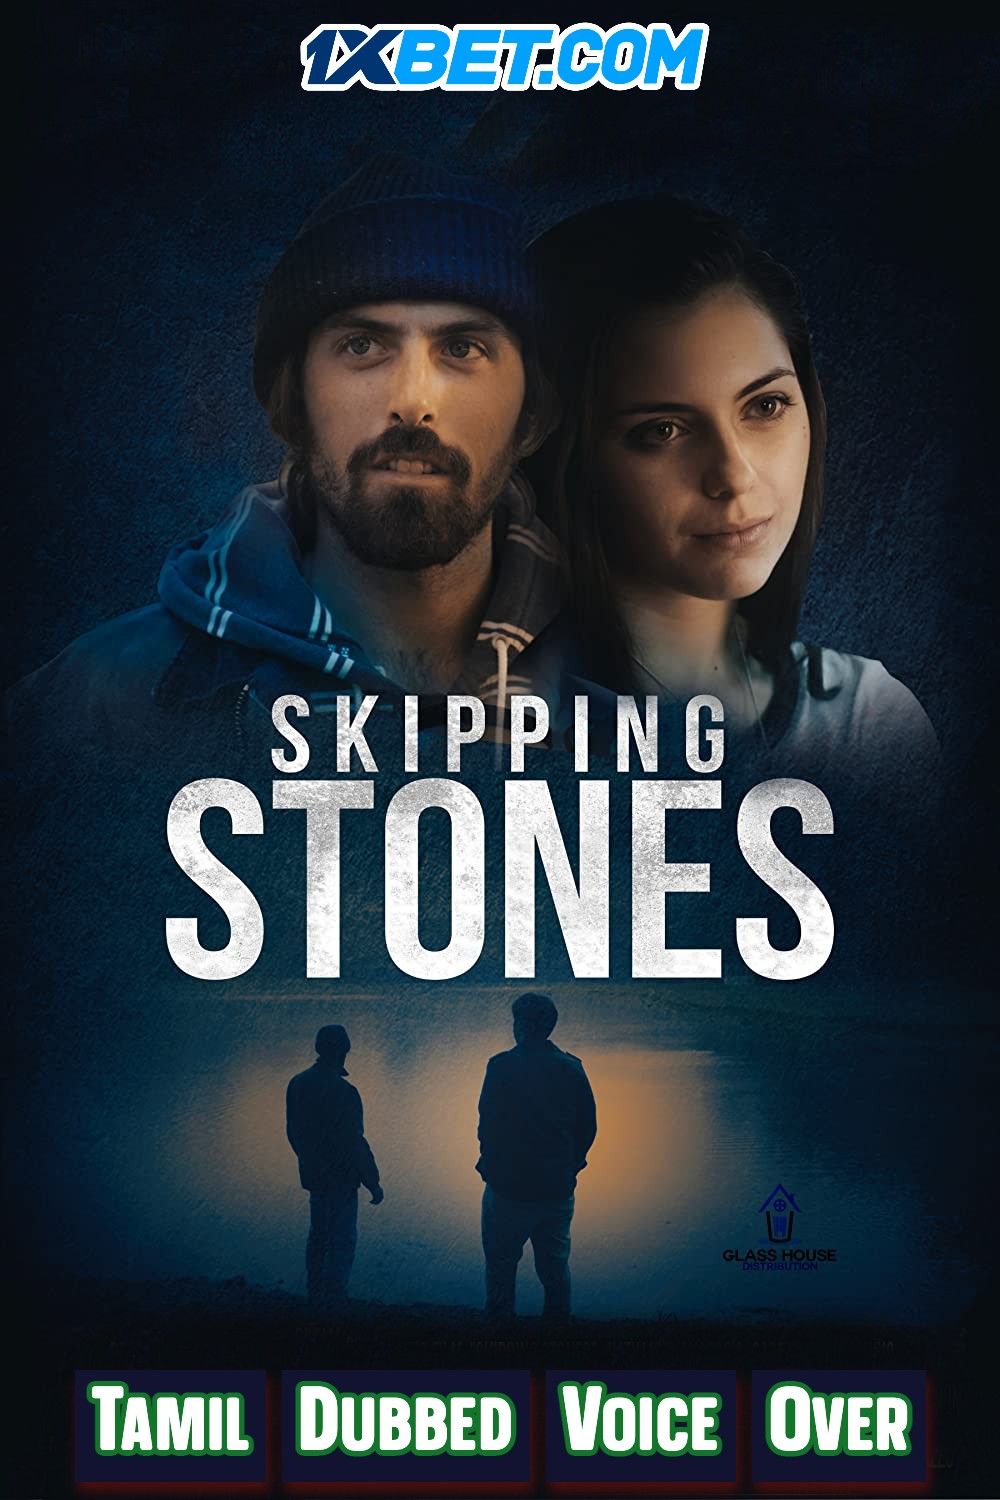 Skipping Stones (2020) Tamil (Voice Over) Dubbed BluRay download full movie